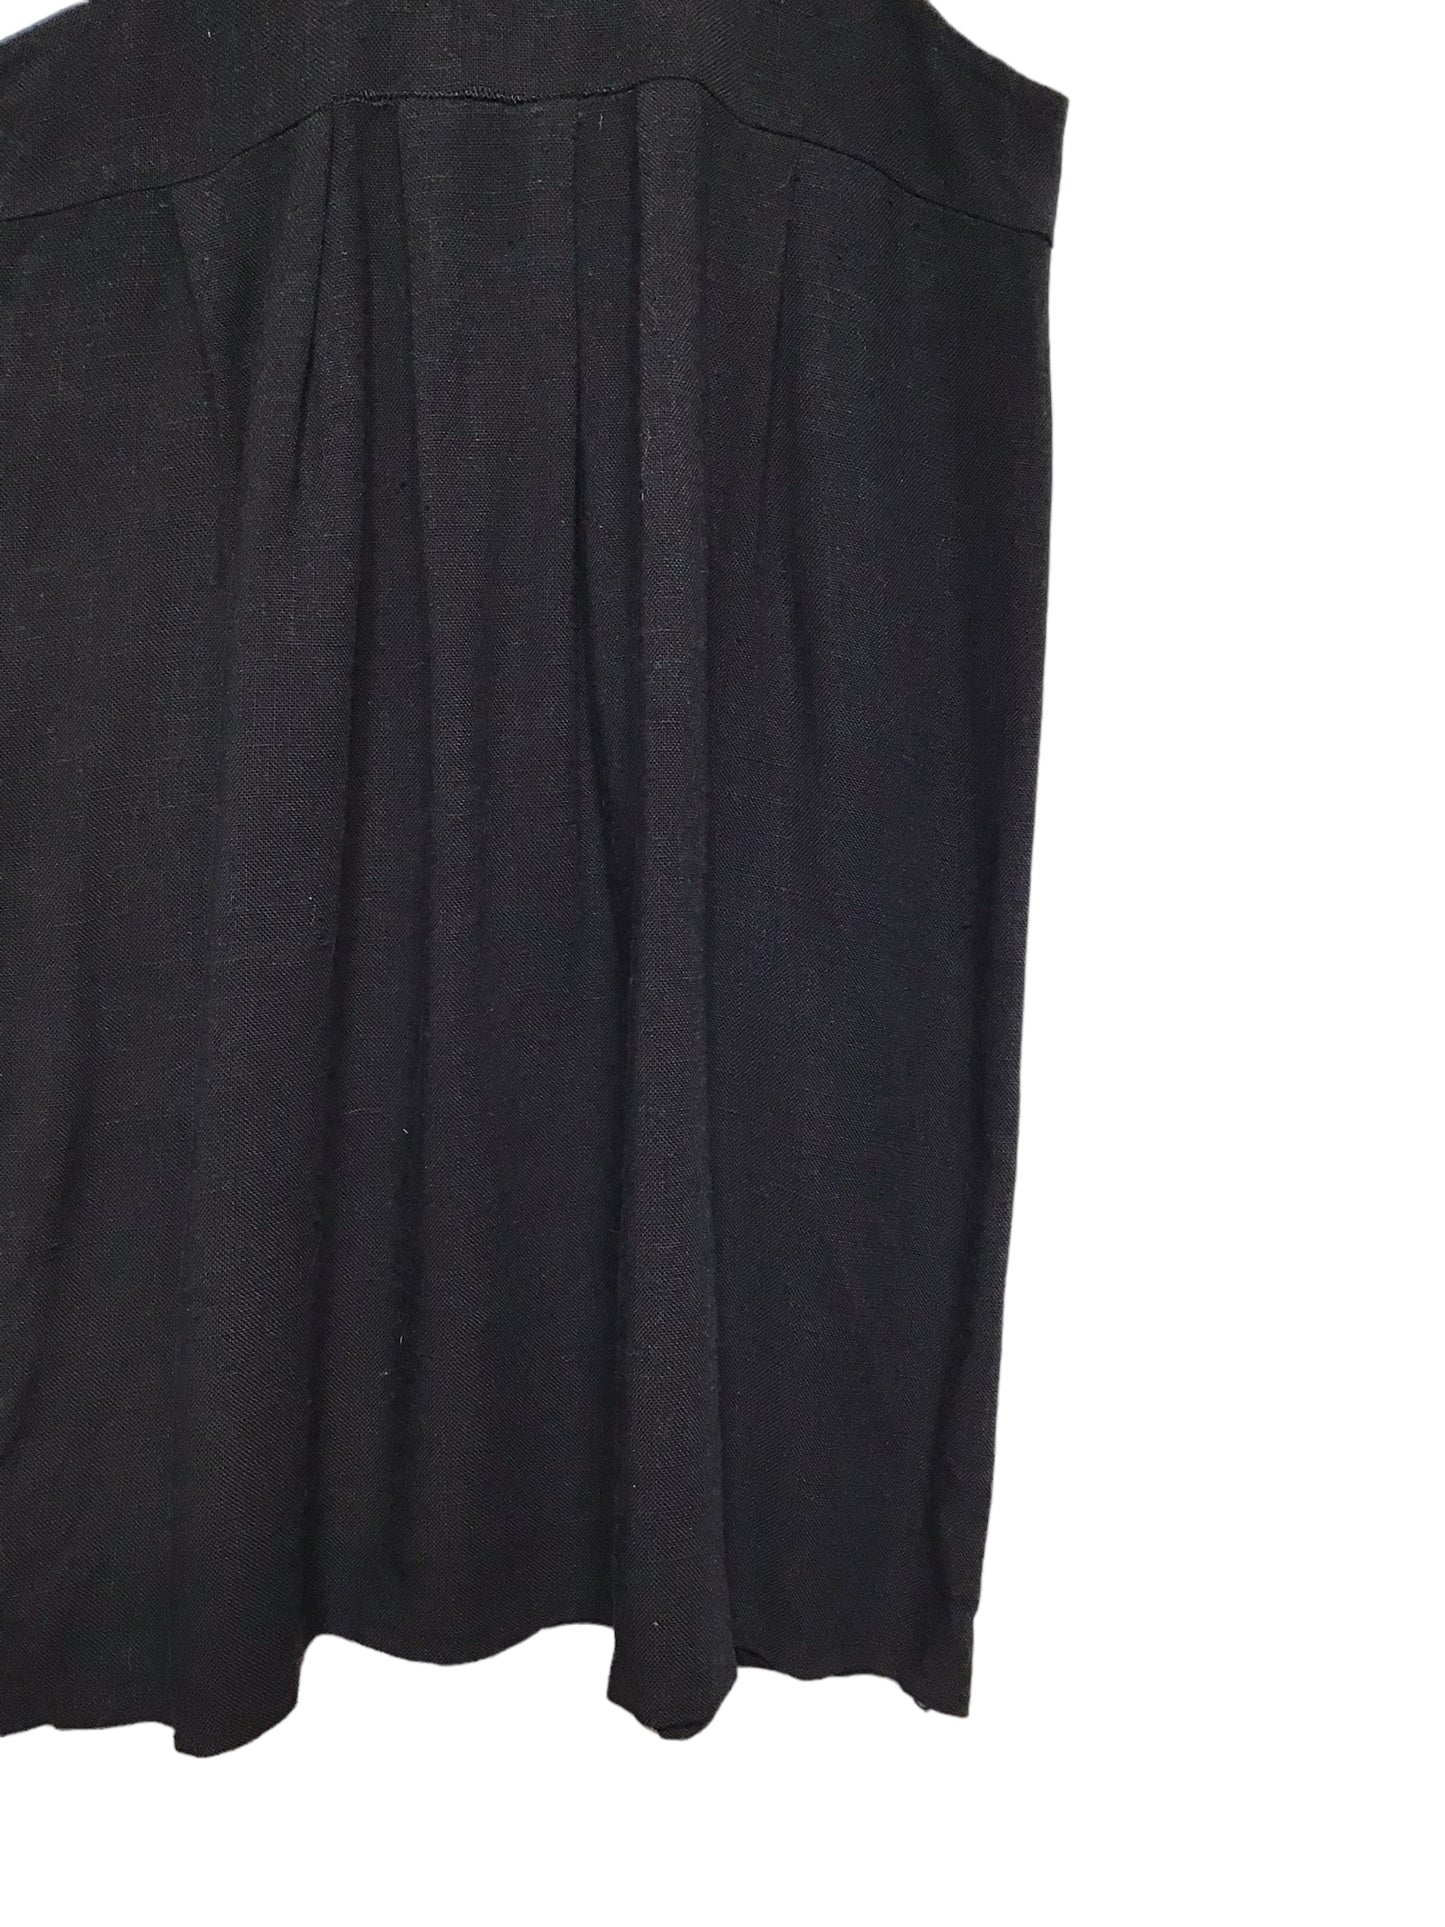 Floaty Black Top (Size S)